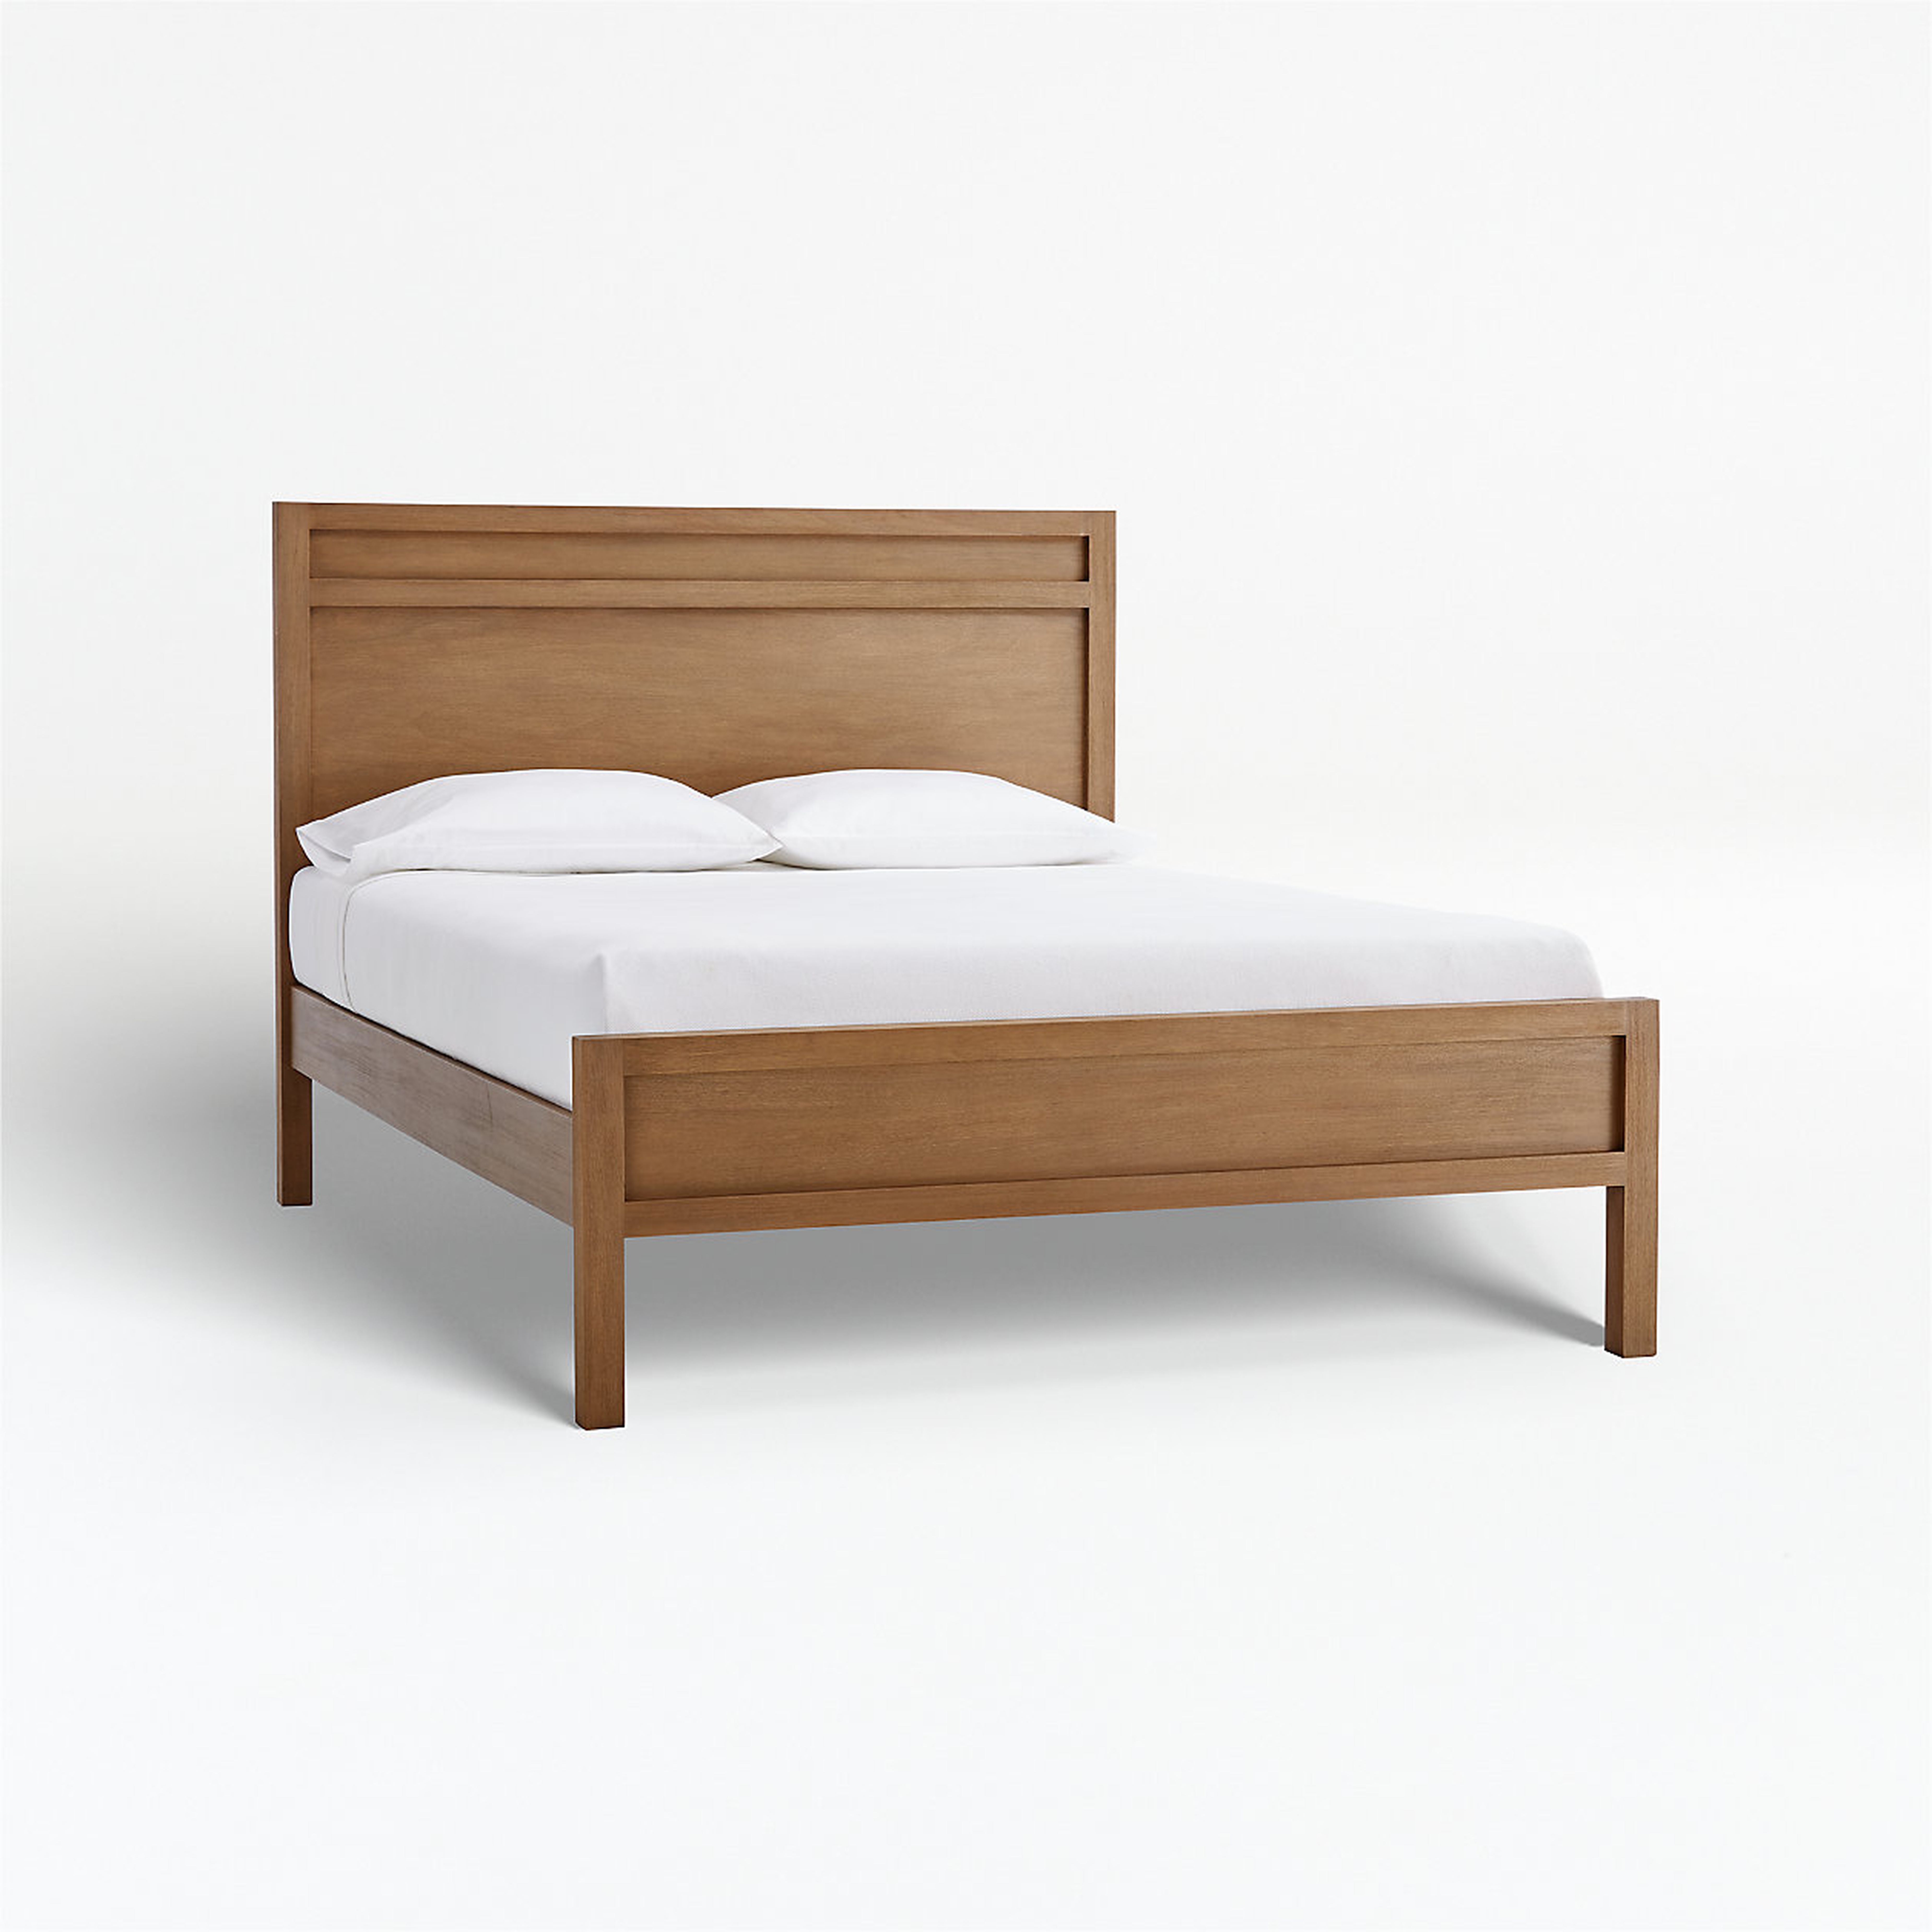 Keane Driftwood King Bed - Crate and Barrel